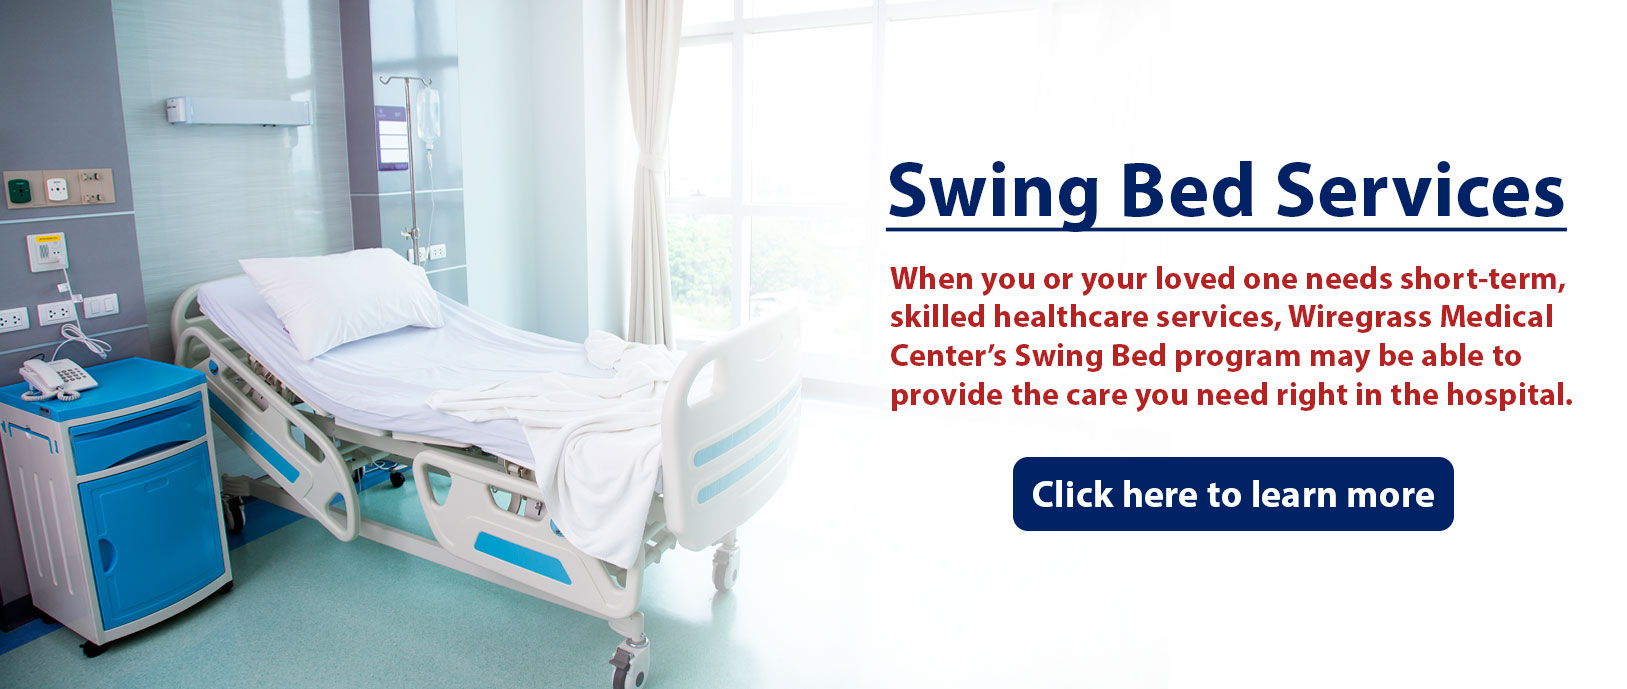 Banner picture of a hospital room that has a swing bed, side table, phone, and window. Banner says:

Swing Bed Services

When you or your loved one needs short-term, skilled healthcare services, Wiregrass Medical Center Swing Bed program may be able to provide the care you need right in the hospital.